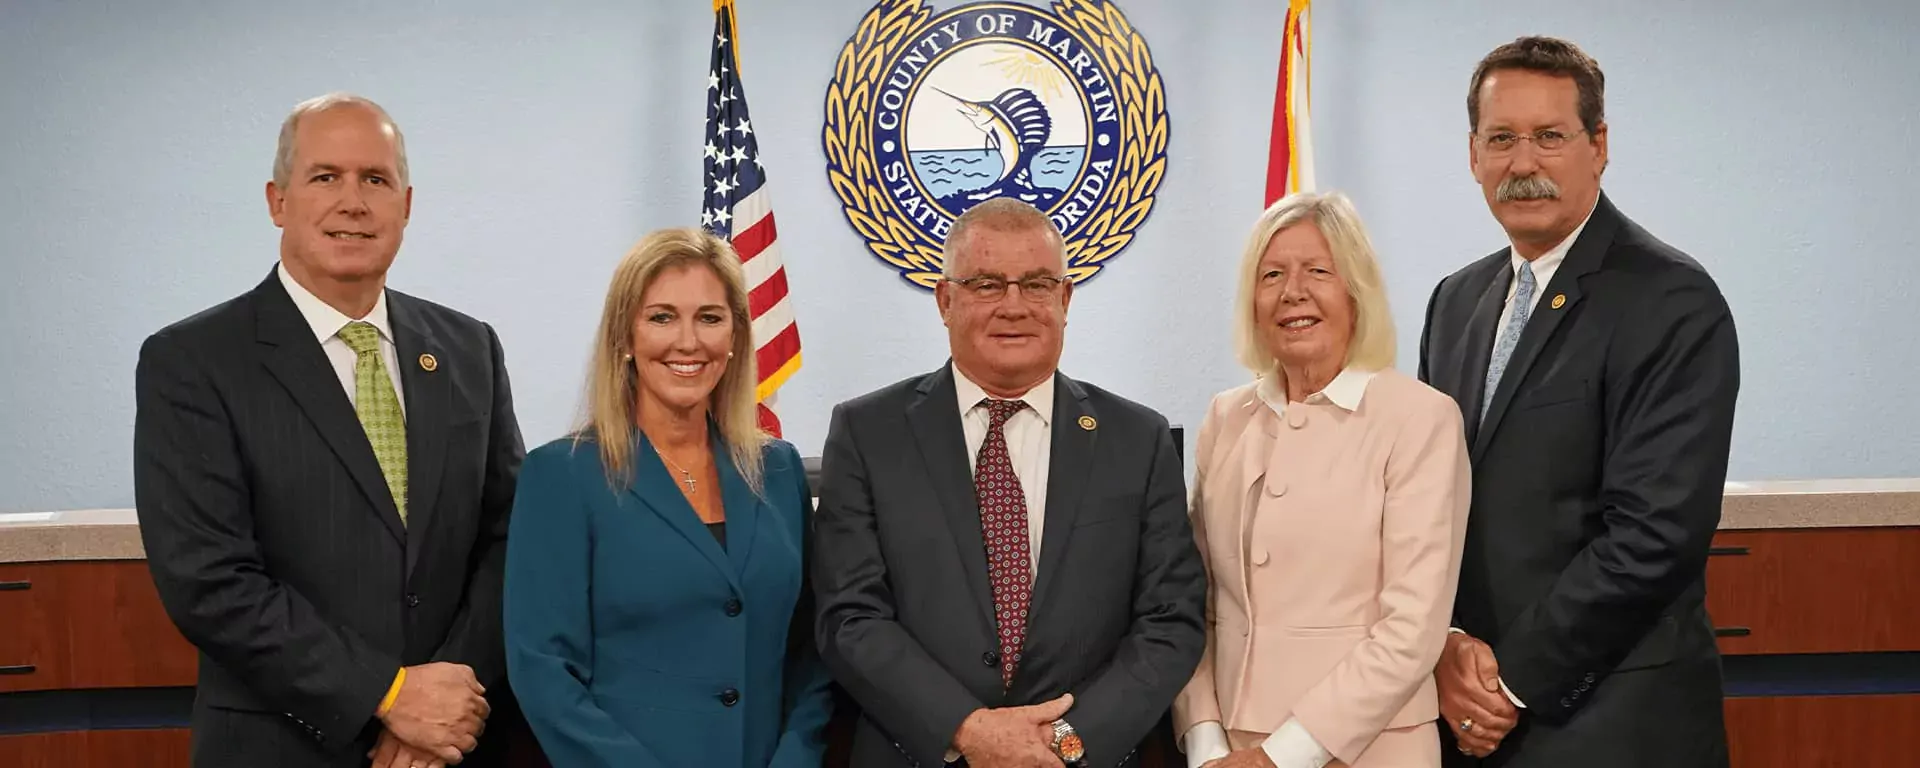 The Martin County Board of County Commissioners